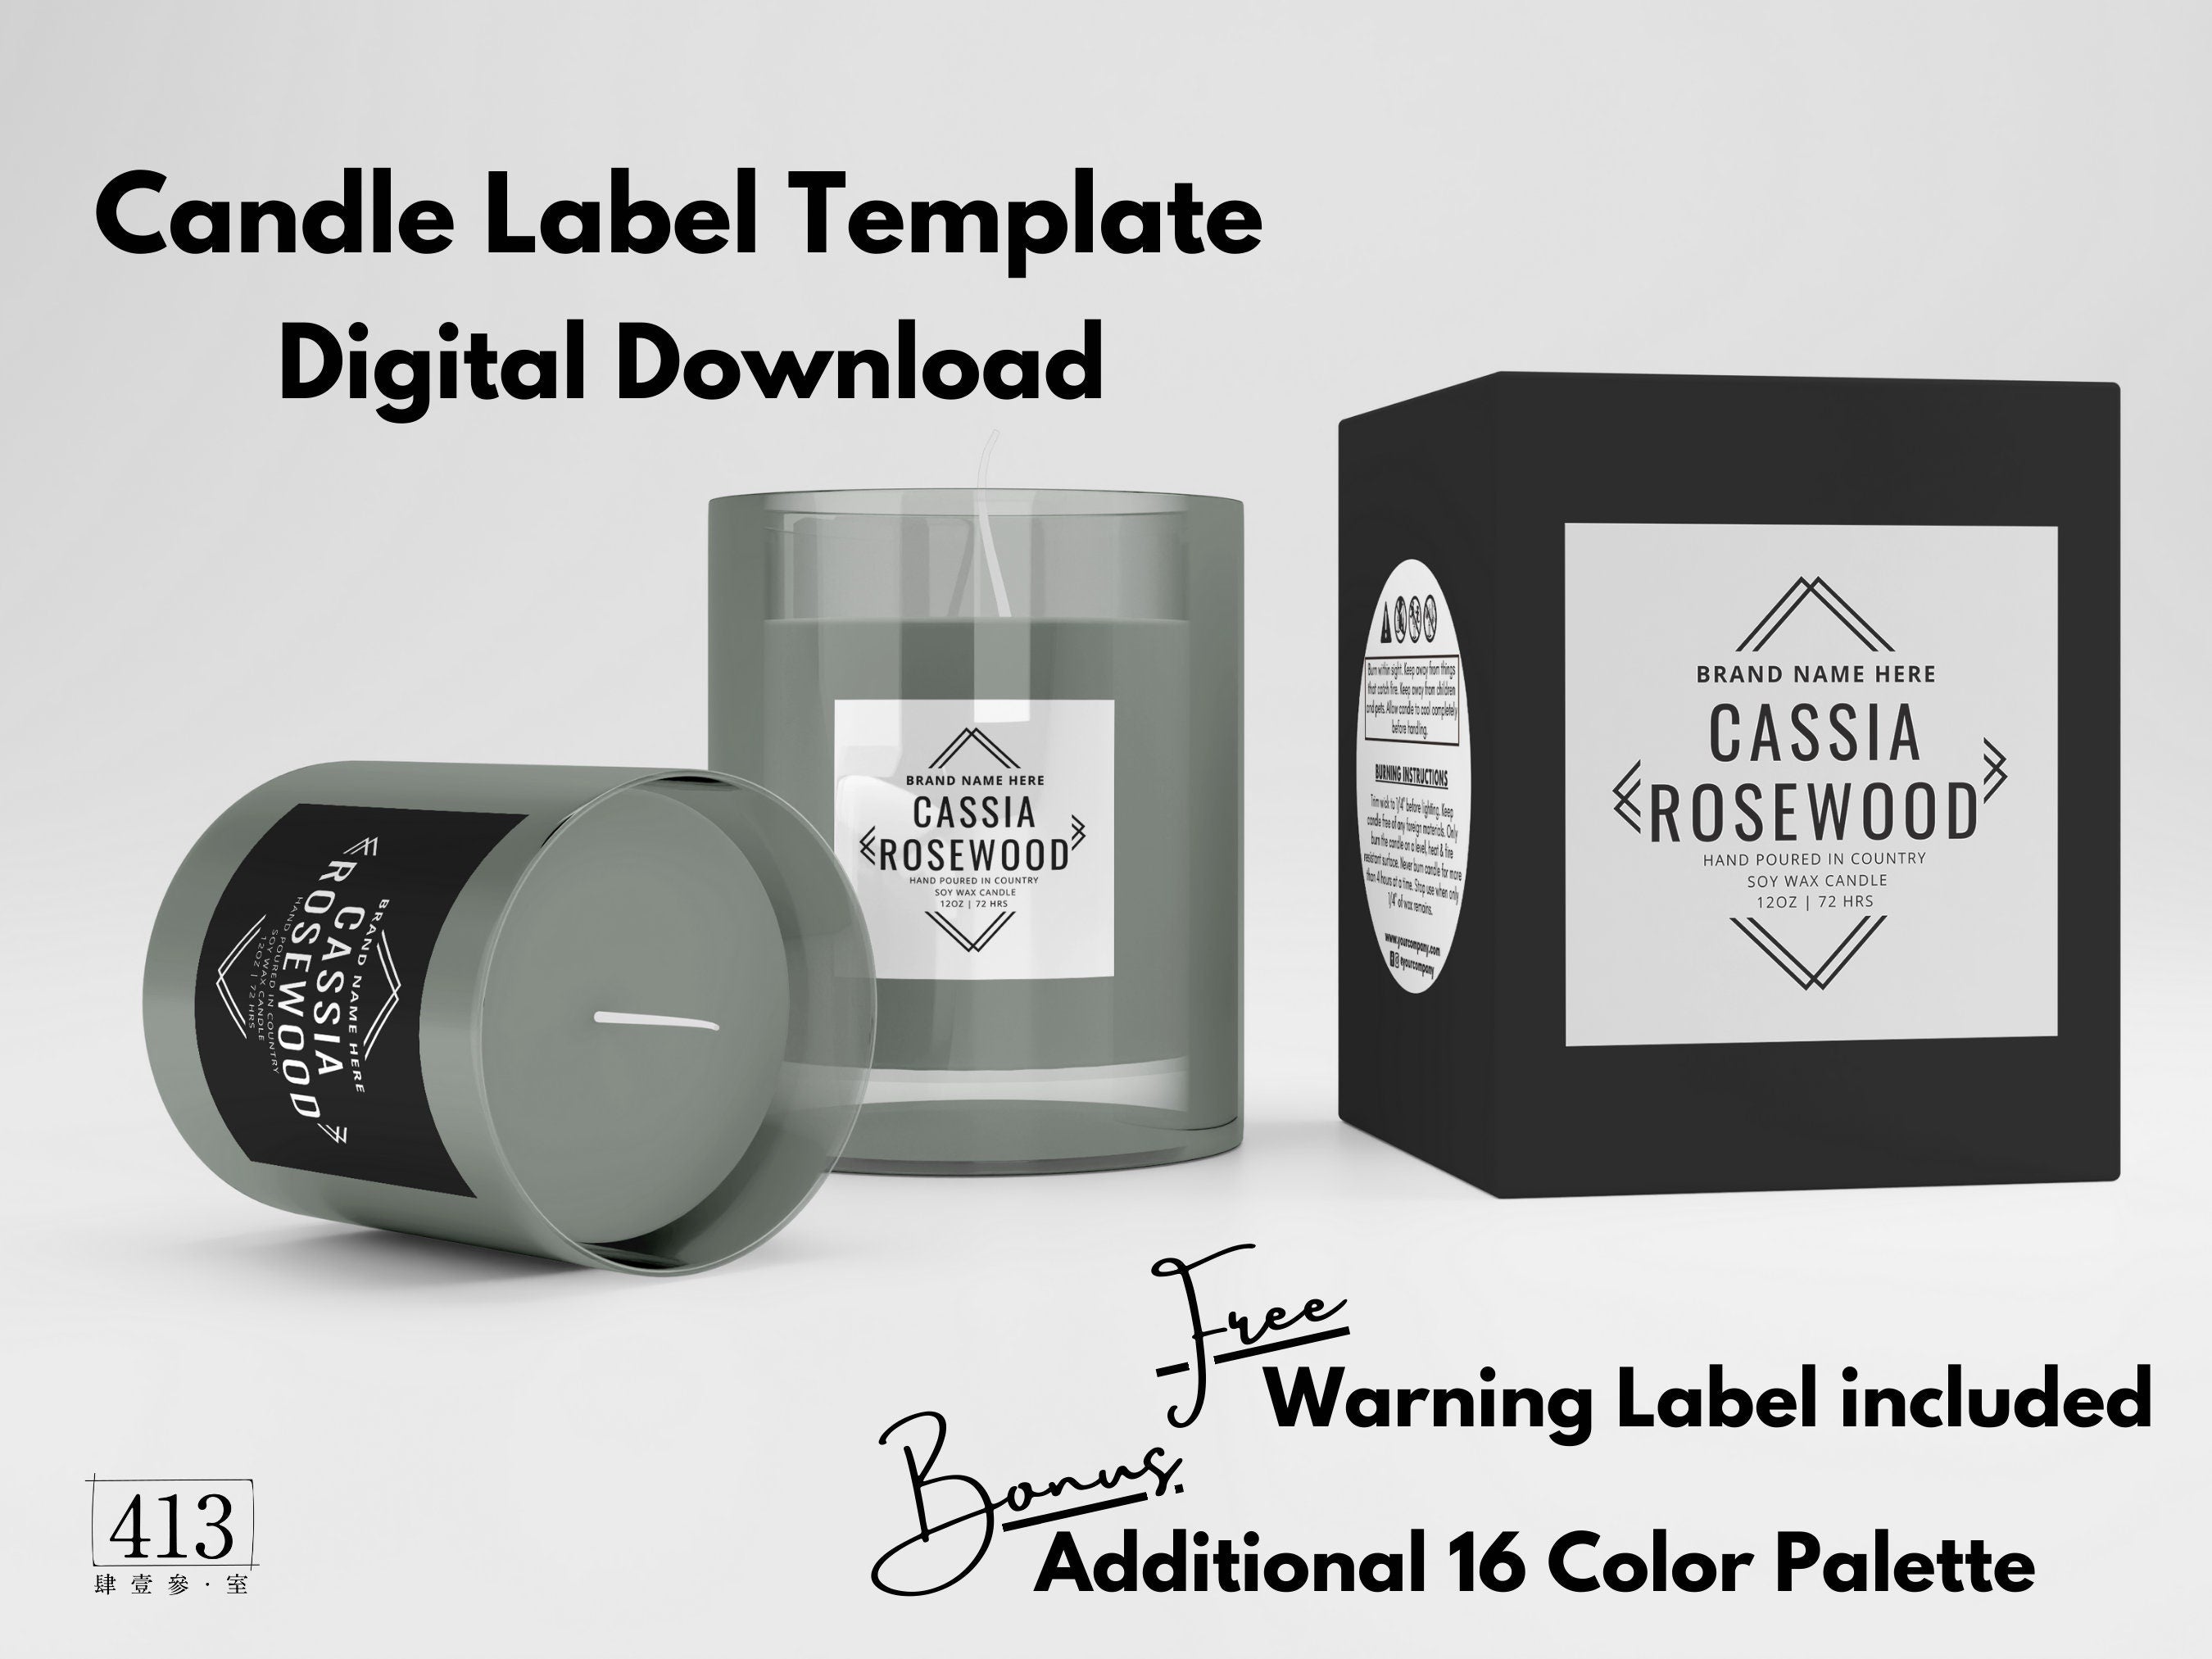 Product Label Templates - Download Product Label Designs  Warning labels,  Candle labels printable, Candle label template